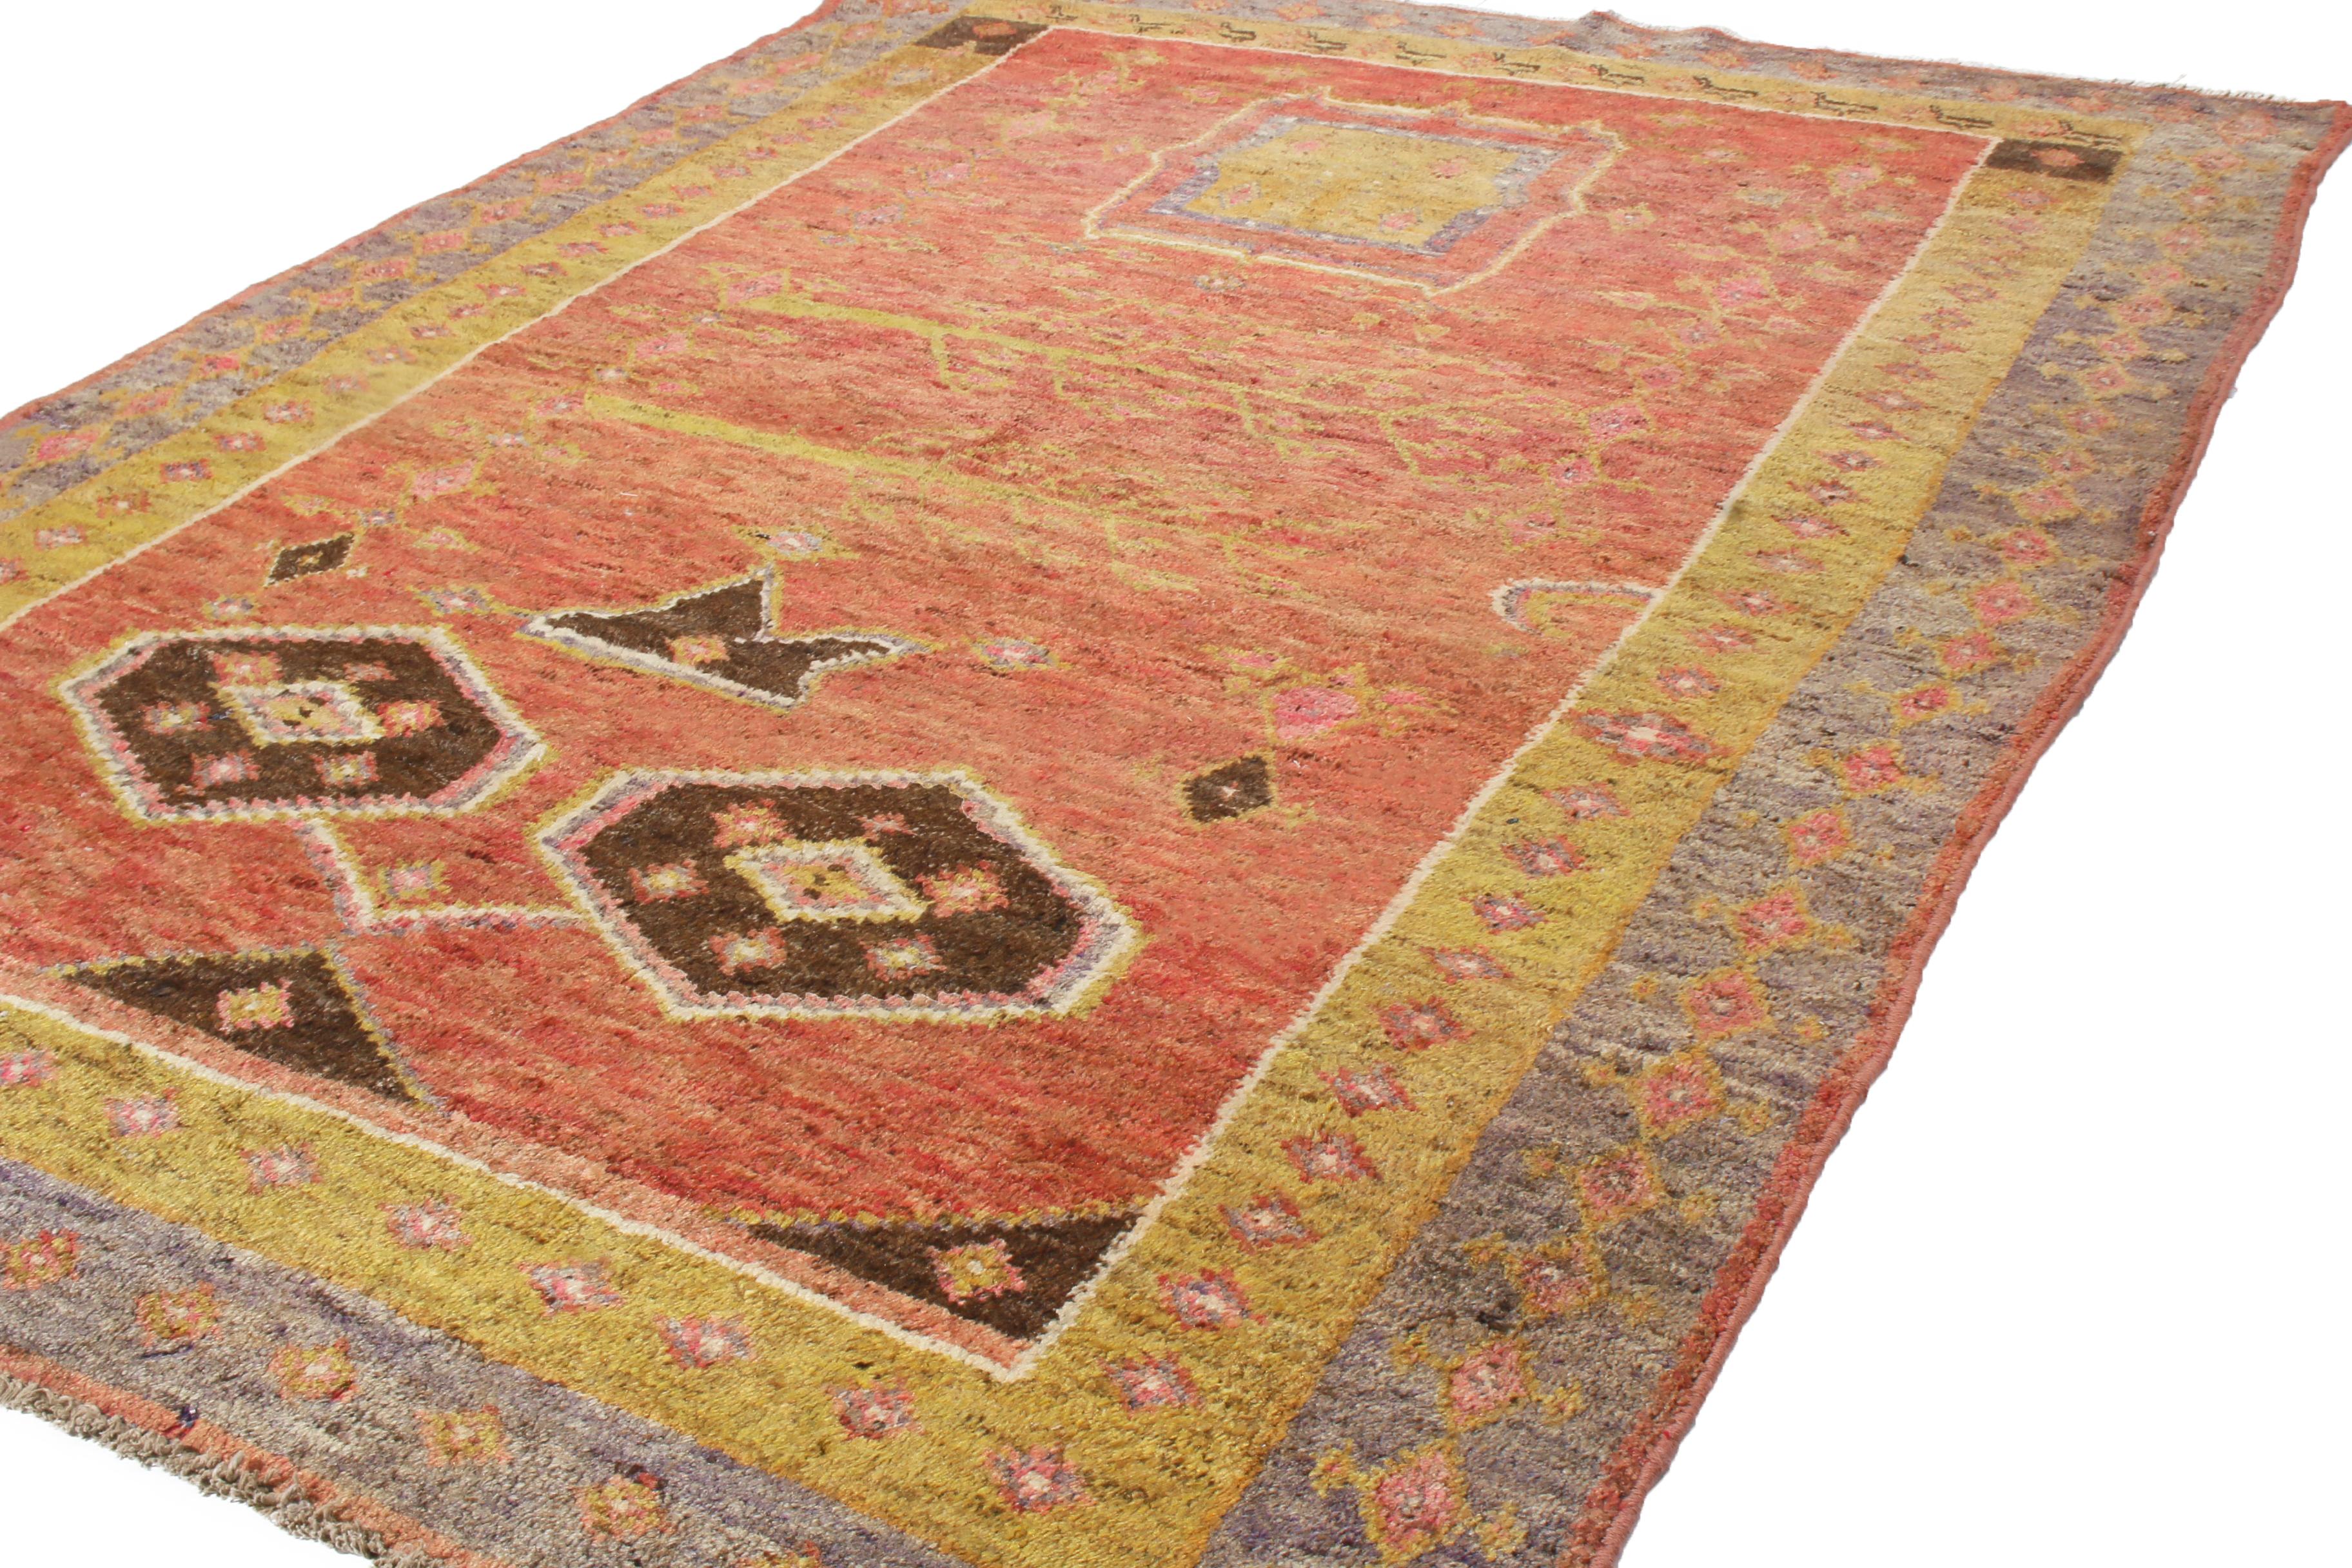 East Turkestani Antique Khotan Traditional Geometric Red and Golden Yellow Wool Rug